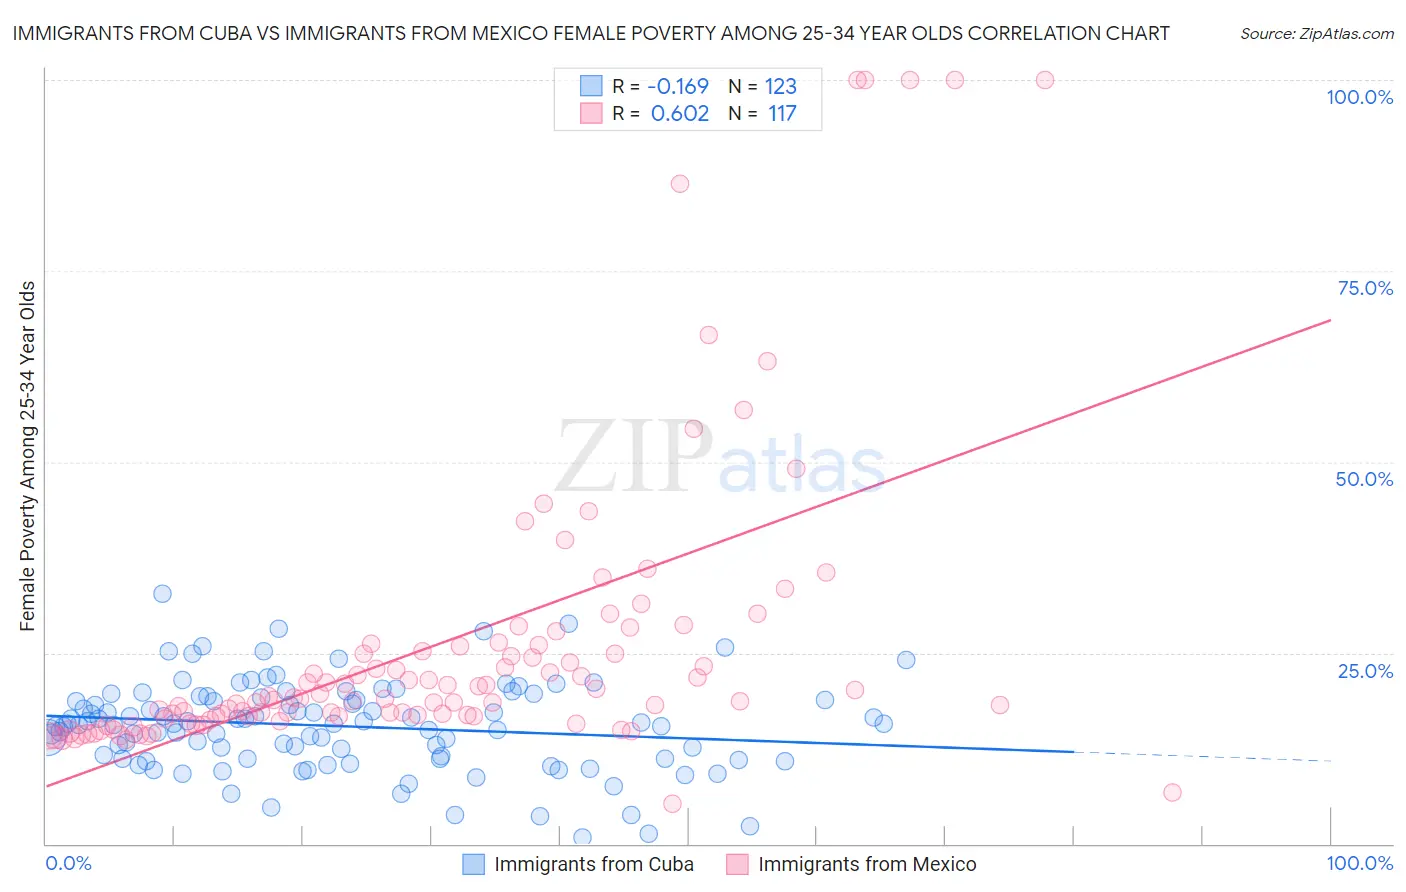 Immigrants from Cuba vs Immigrants from Mexico Female Poverty Among 25-34 Year Olds